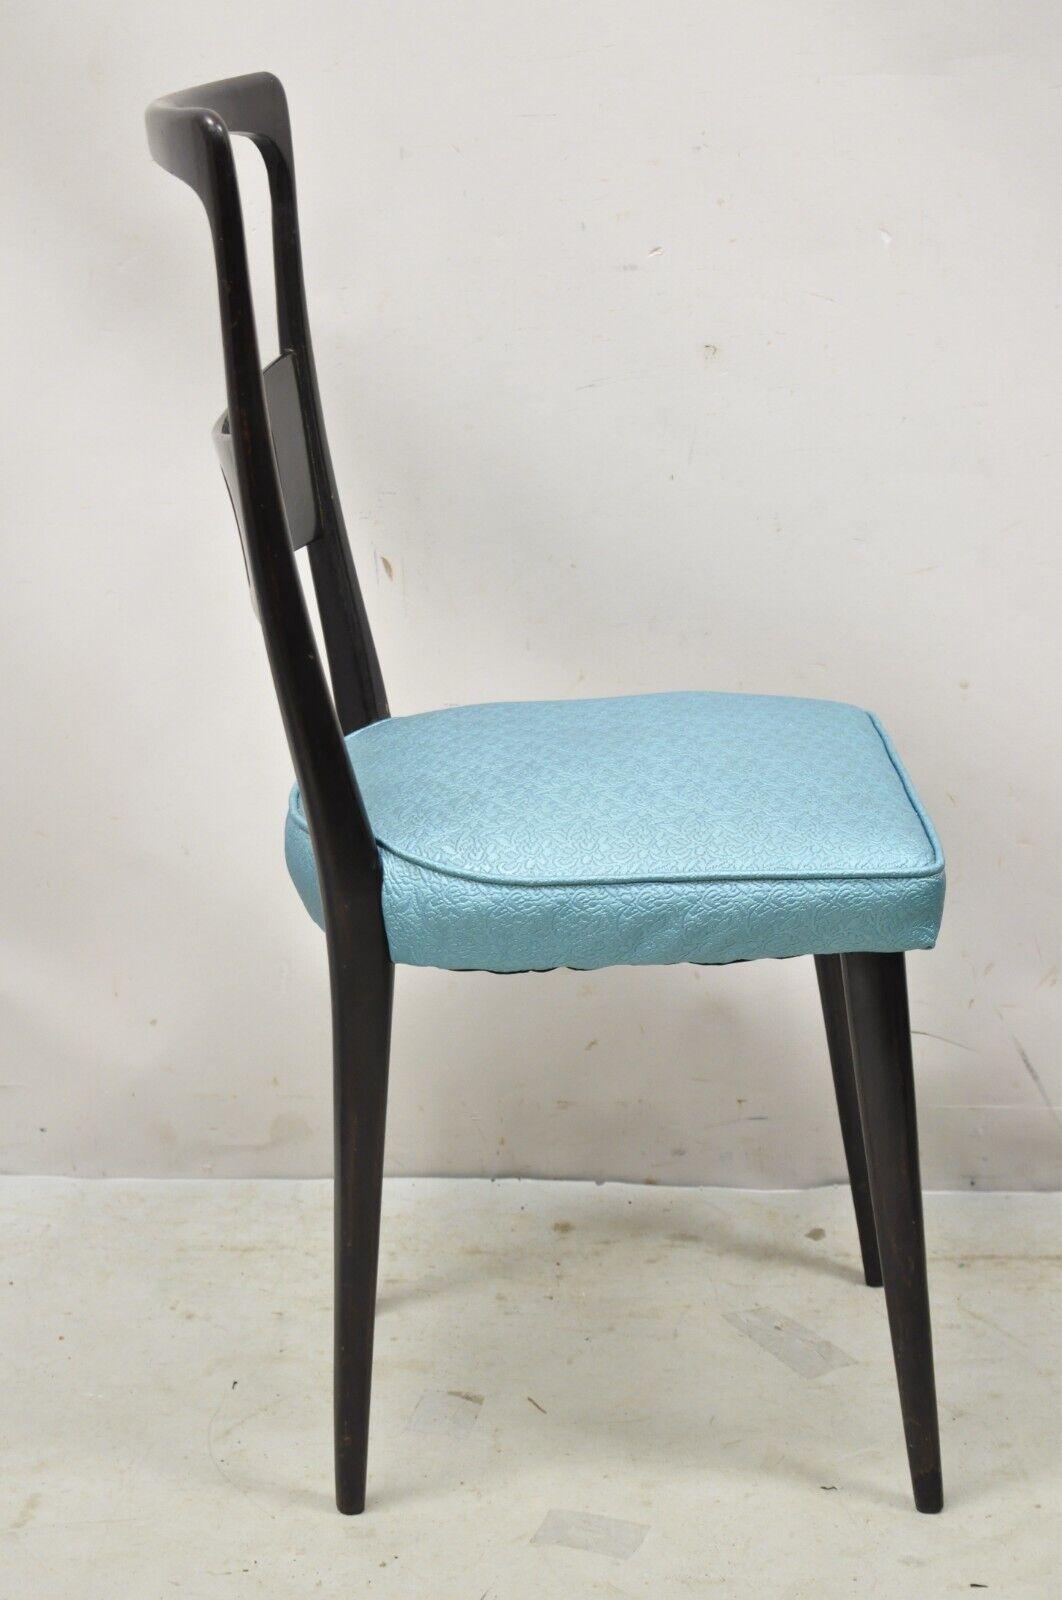 Vintage Italian Mid-Century Modern Ico Parisi Style Dining Chairs, Set of 4 For Sale 6